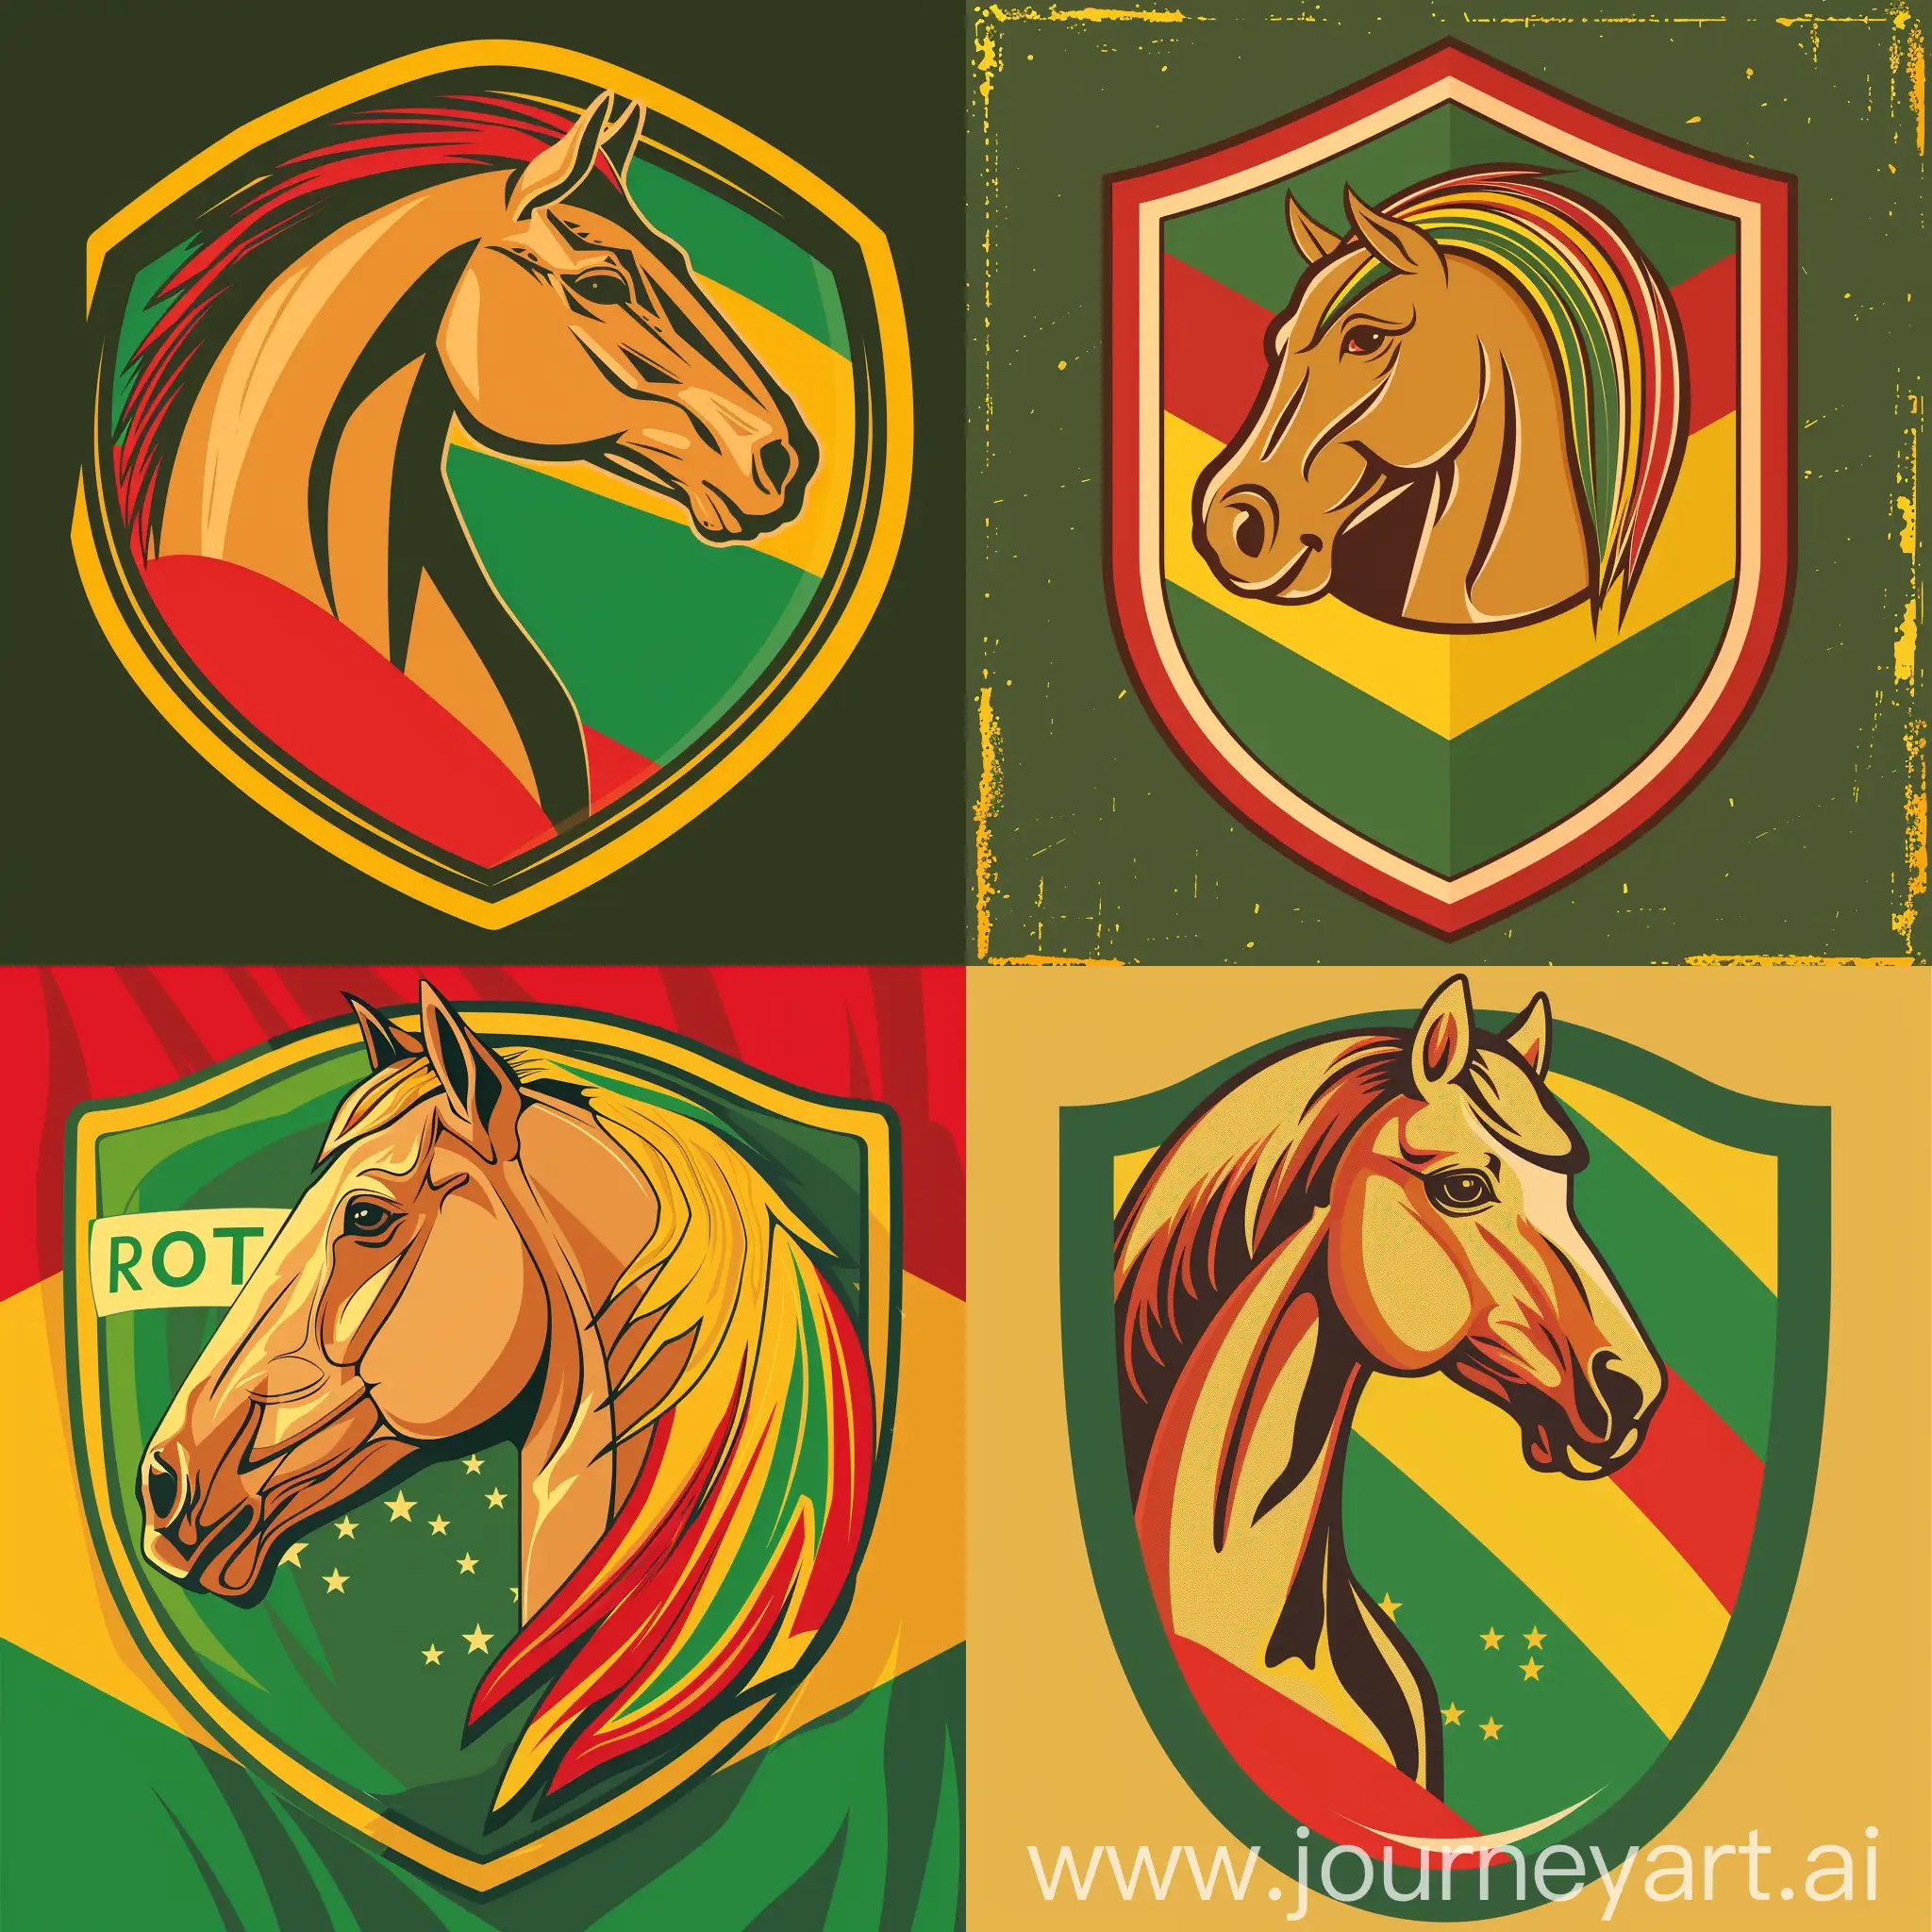 Modern vector image of a caramel horse on a shield green, red and yellow colors flag Rio Grande do Sul in Brazil